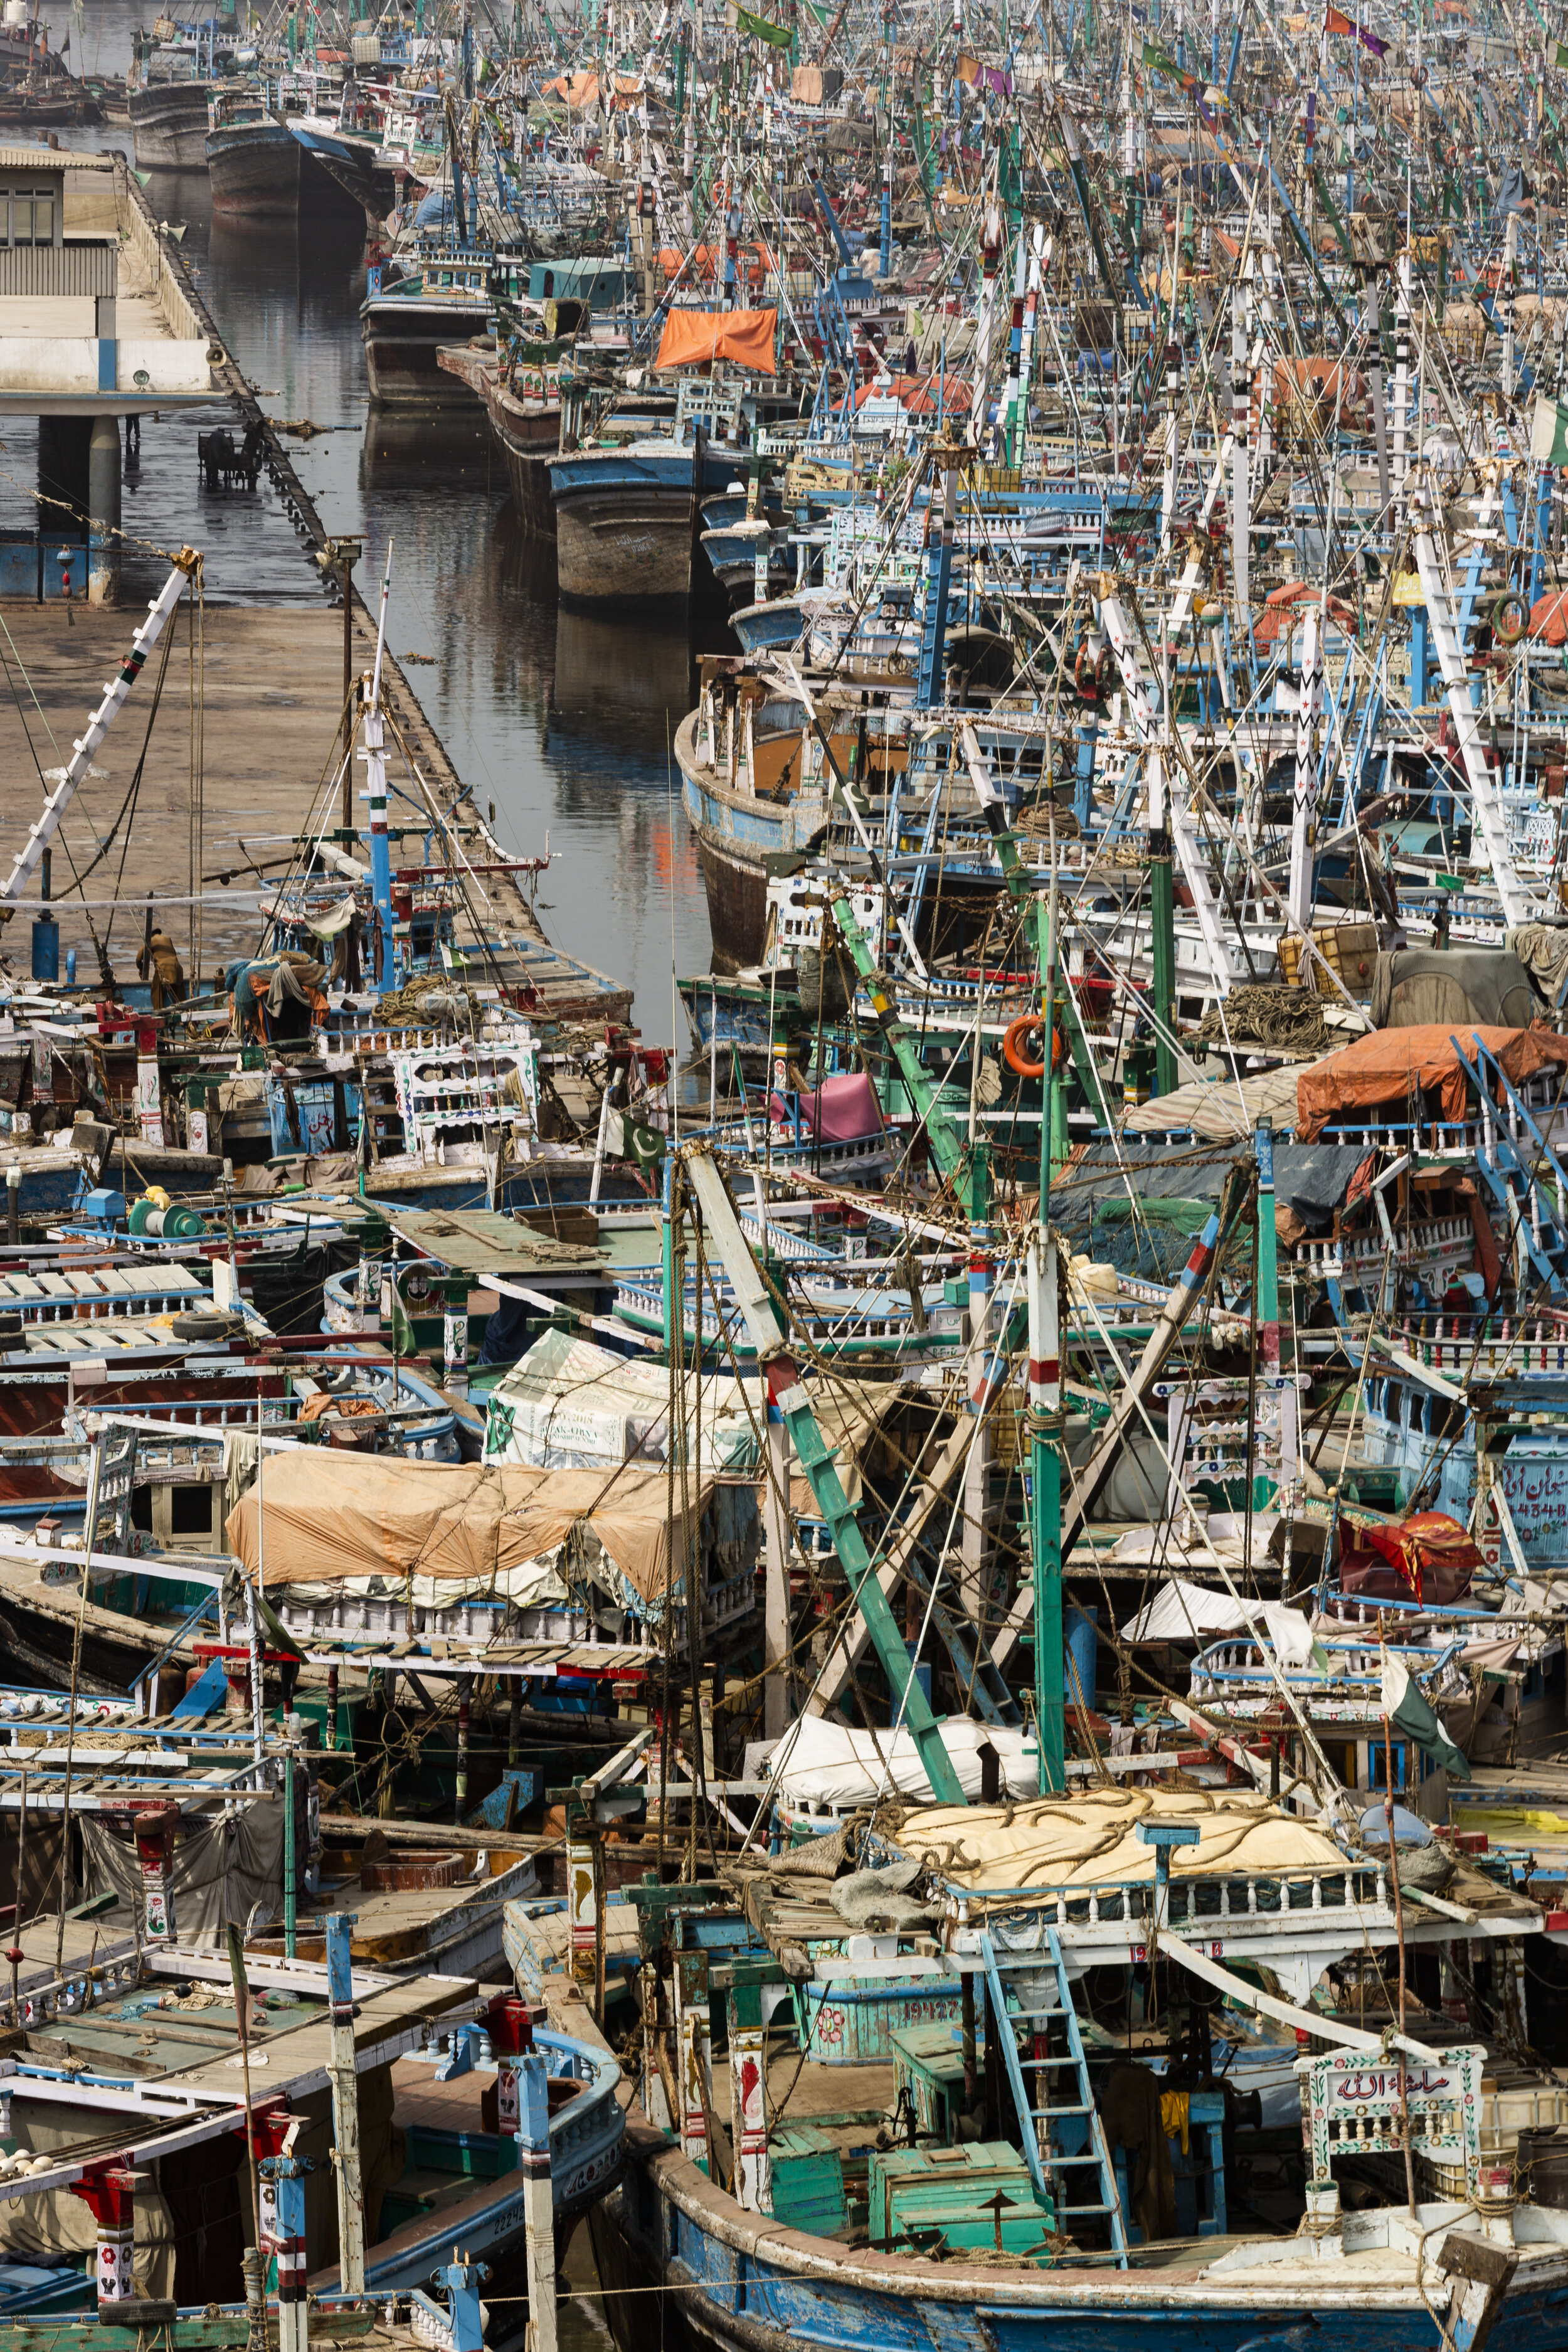  Boats are moored at Karachi Fish Harbor in Pakistan following an alert for Cyclone Vayu, Thursday, June 13, 2019. Cyclone Vayu, now categorized as a tropical cyclone, is likely to stay clear of Pakistan as it moves up along the Indian coastal areas 